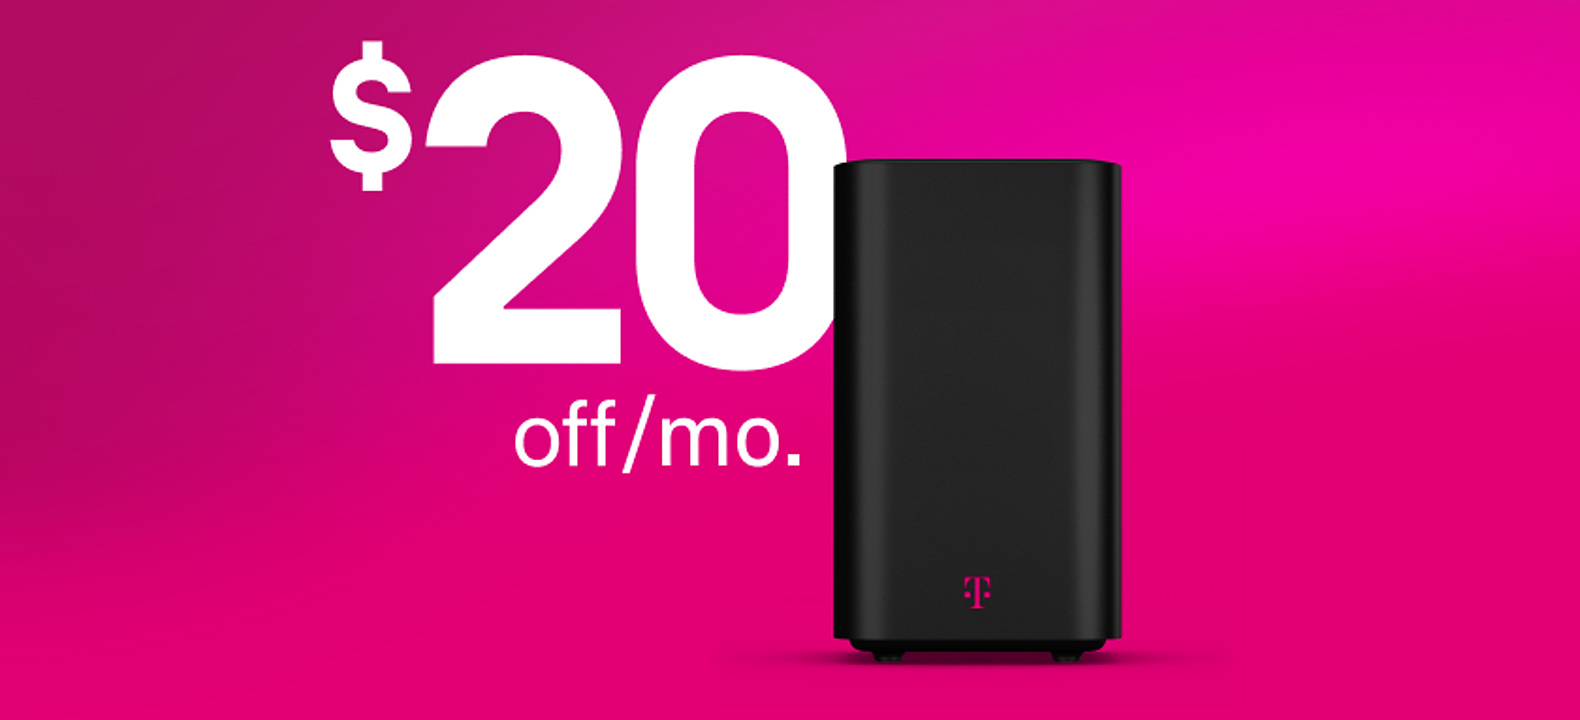 A T-Mobile high-speed internet router and the $20 off price point.